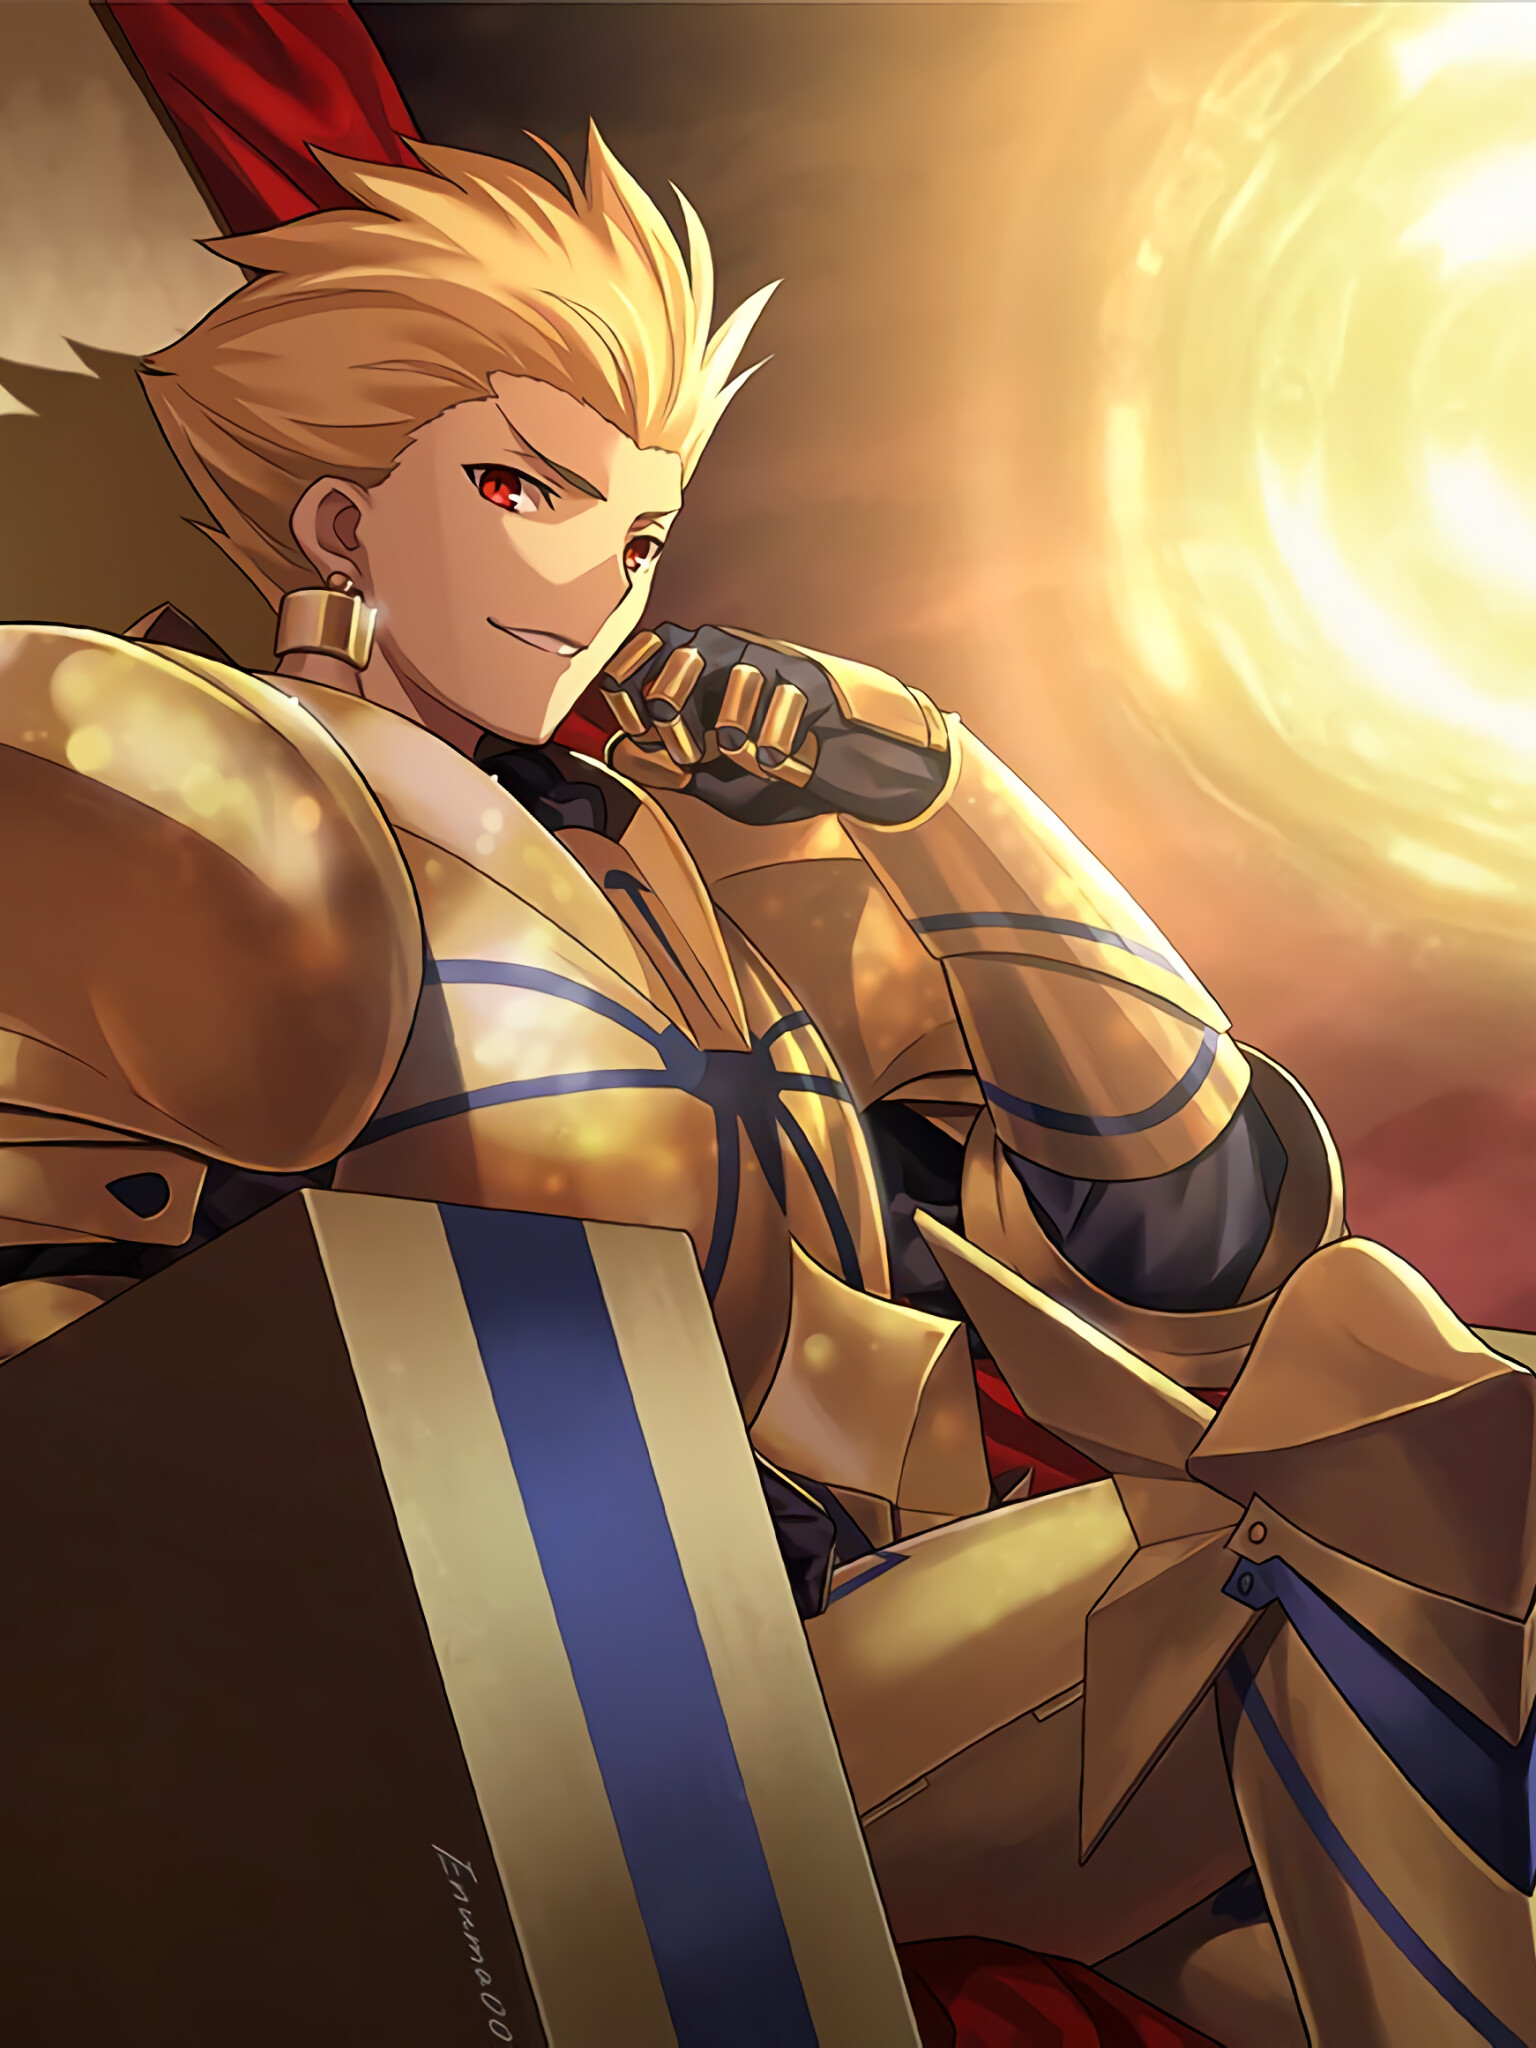 Gilgamesh (Fate/Zero): The leader, A simple style of ruling, acquiring worthy treasures and guarding them, Fictional character. 1540x2050 HD Background.